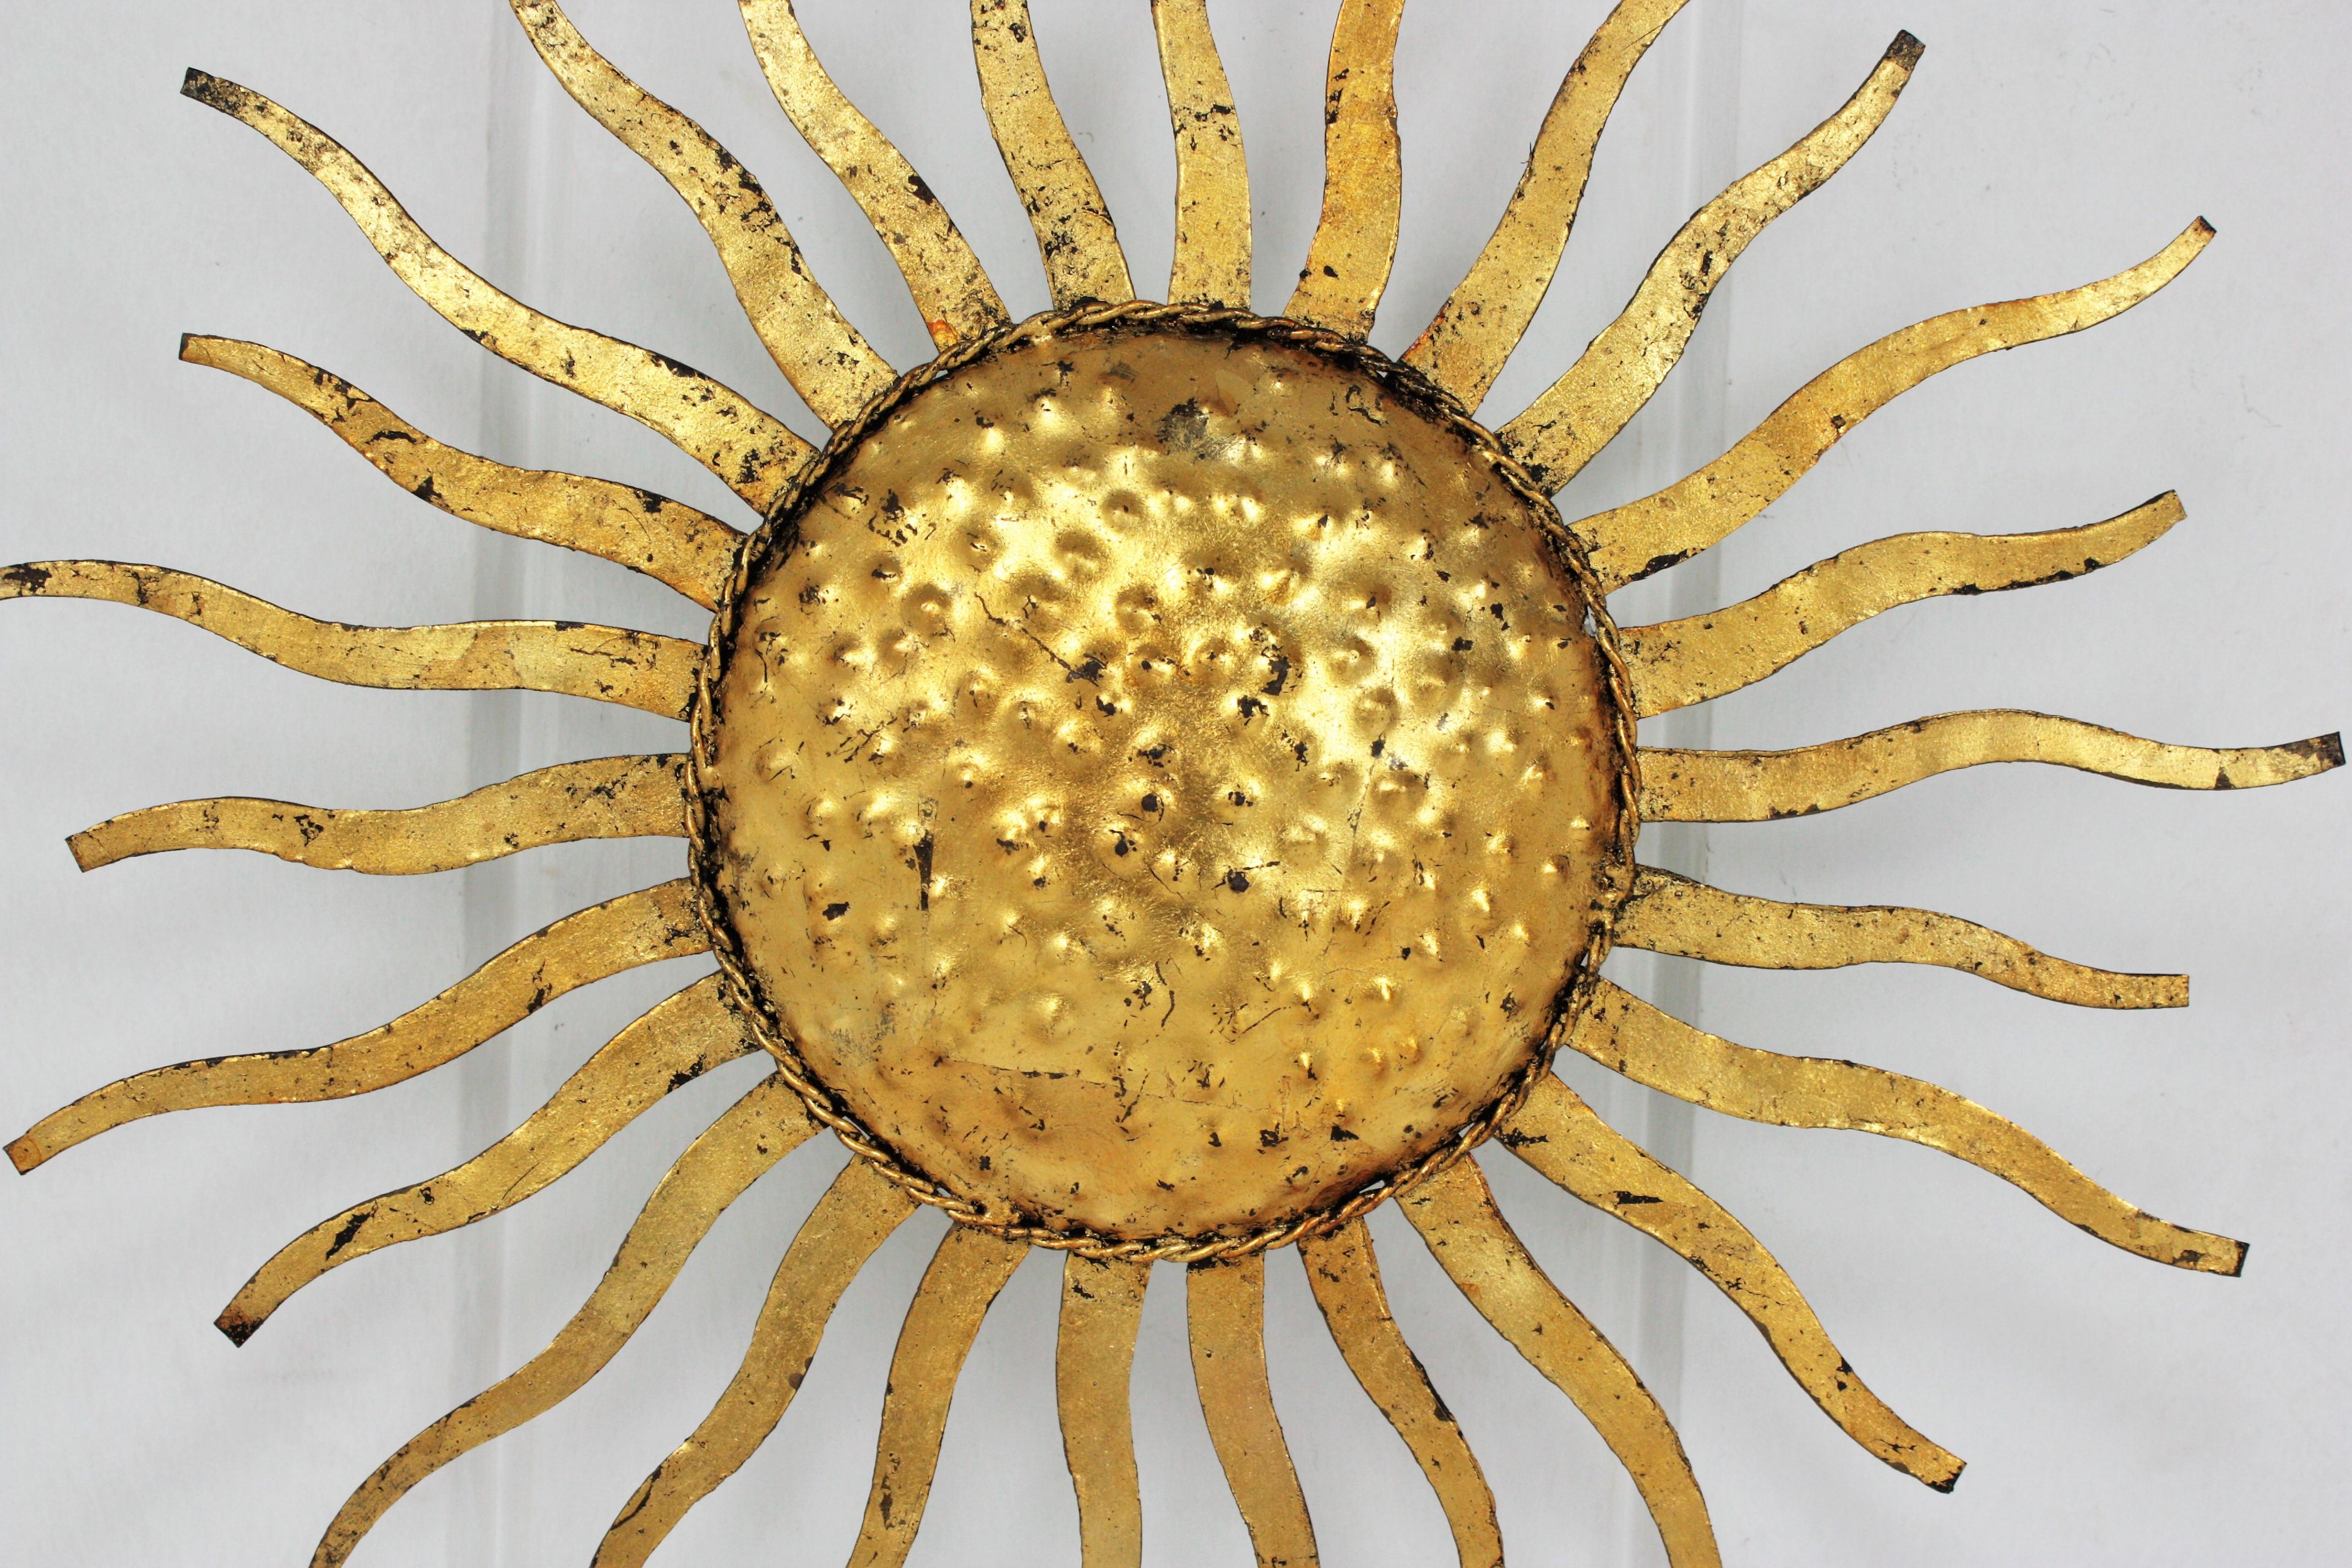 Wrought gilt metal sunburst ceiling lamp or light fixture, France, 1950s.
This hand-hammered iron flushmount is heavily adorned by the hammer marks at the central sphere and it has alternating rays in two sizes.
All handcrafted in iron with gold